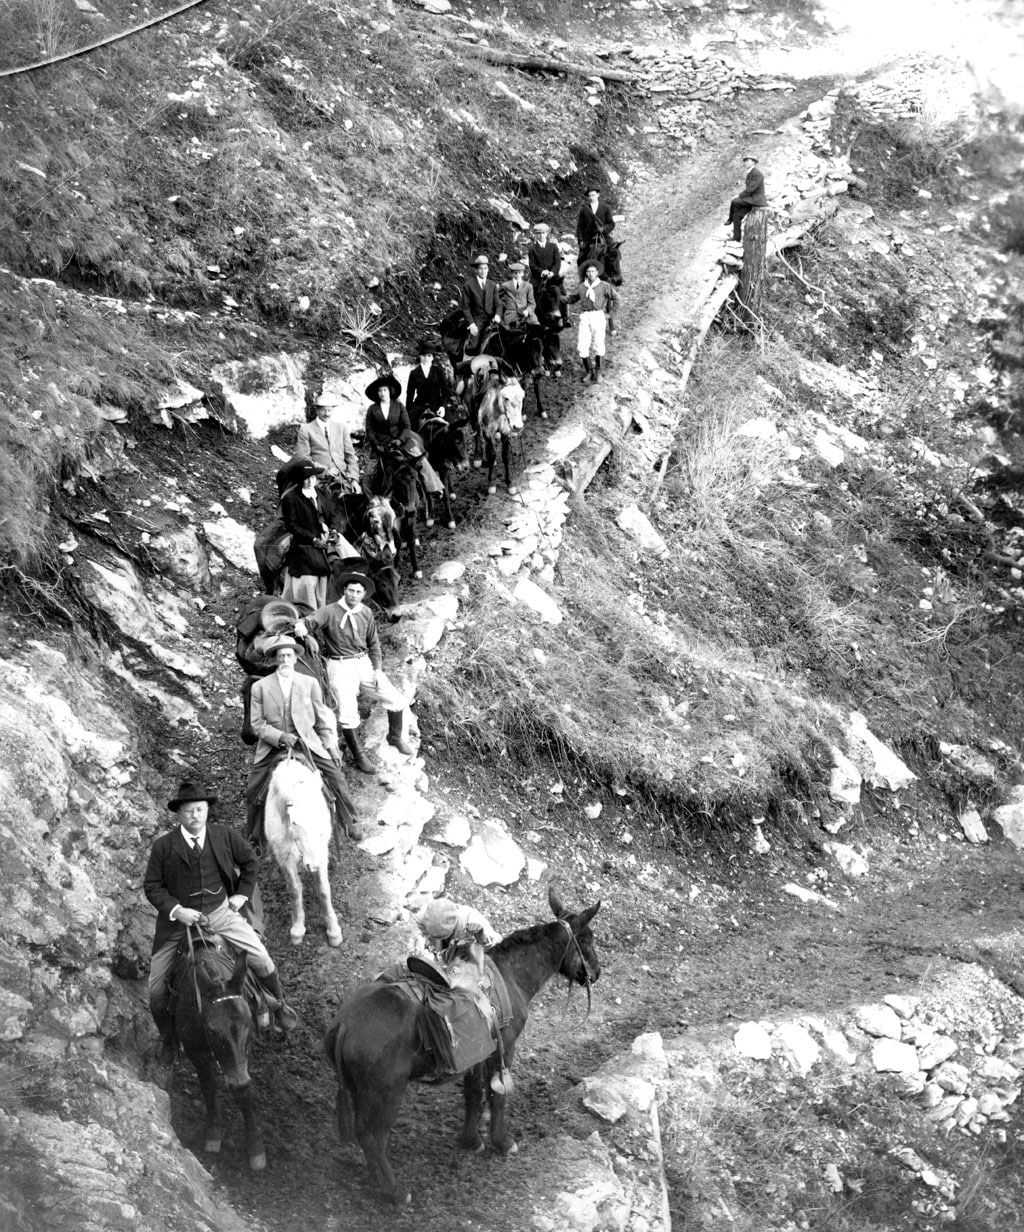 TEDDY ROOSEVELT, JOHN HANCE, & THE COLGATE PARTY START DOWN THE BRIGHT ANGEL TRAIL IN GRAND CANYON. 17 MAR 1911. KOLB BROS.